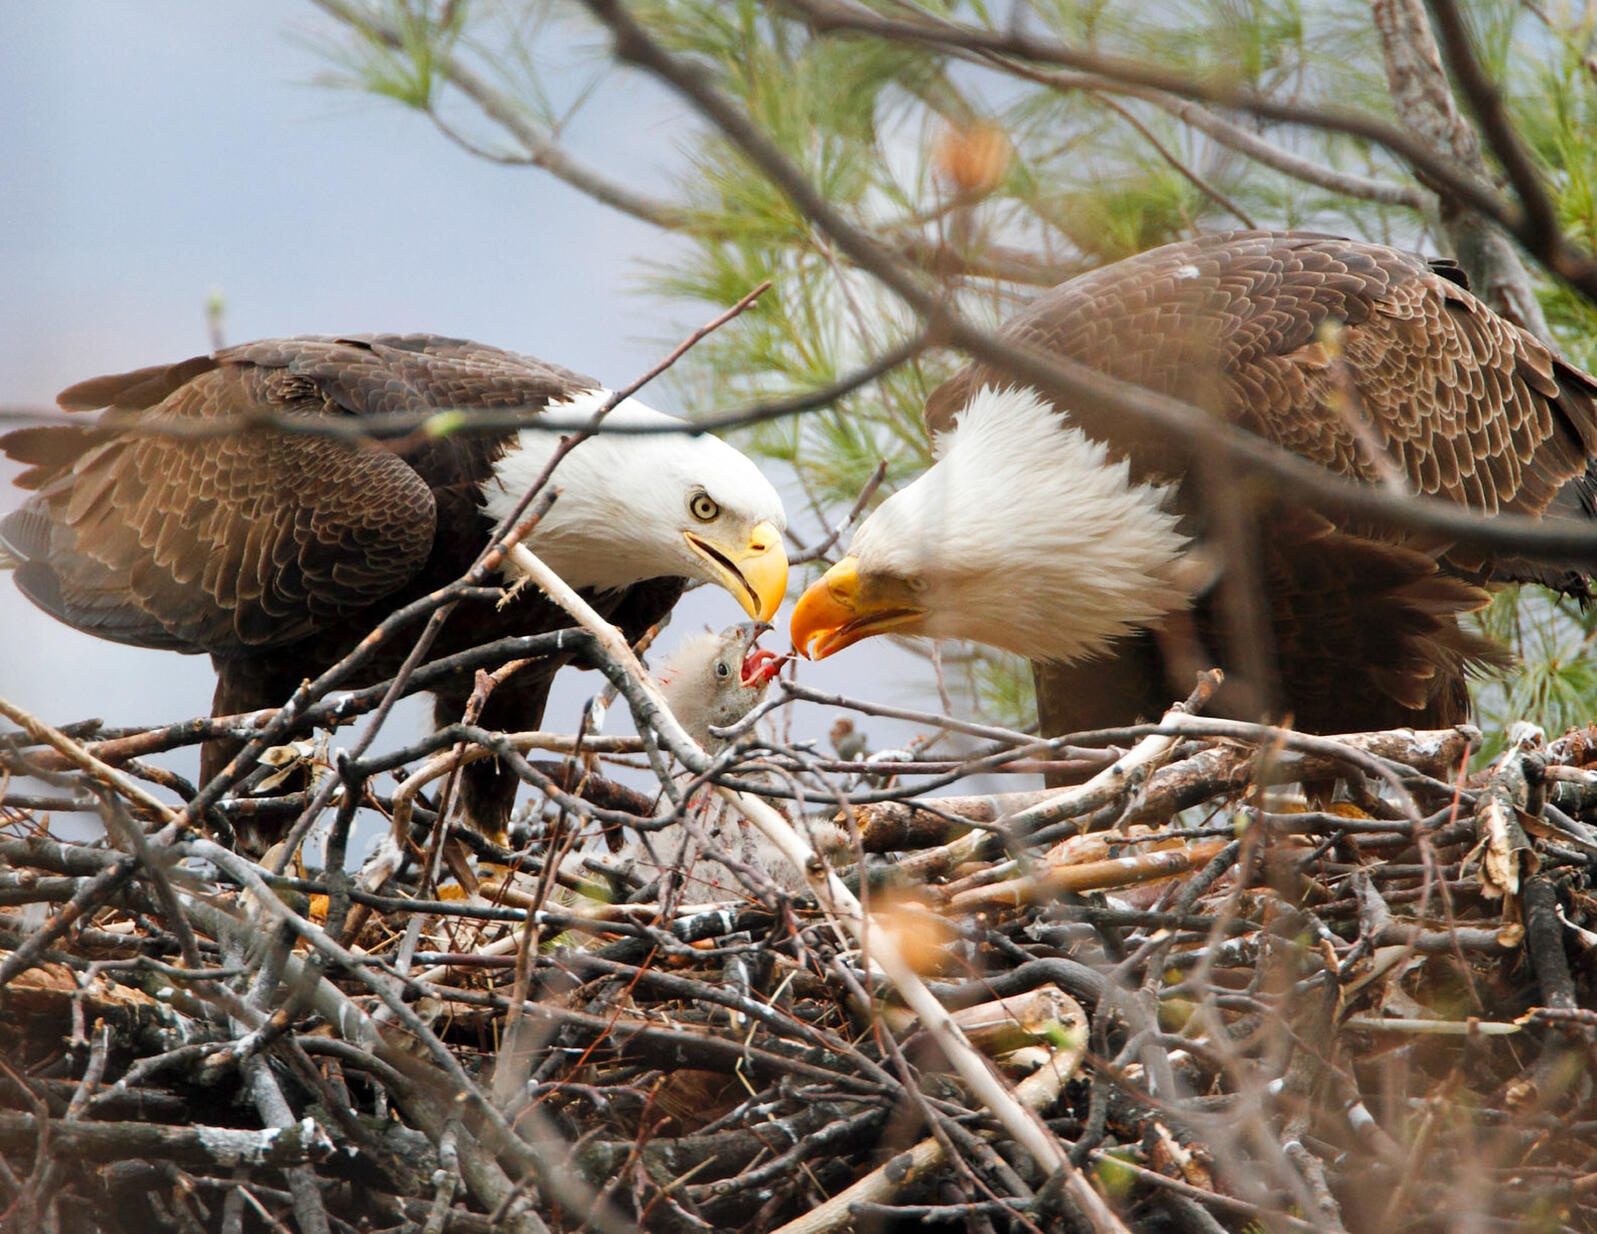 A pair of Bald Eagles feed their eaglet in a nest.